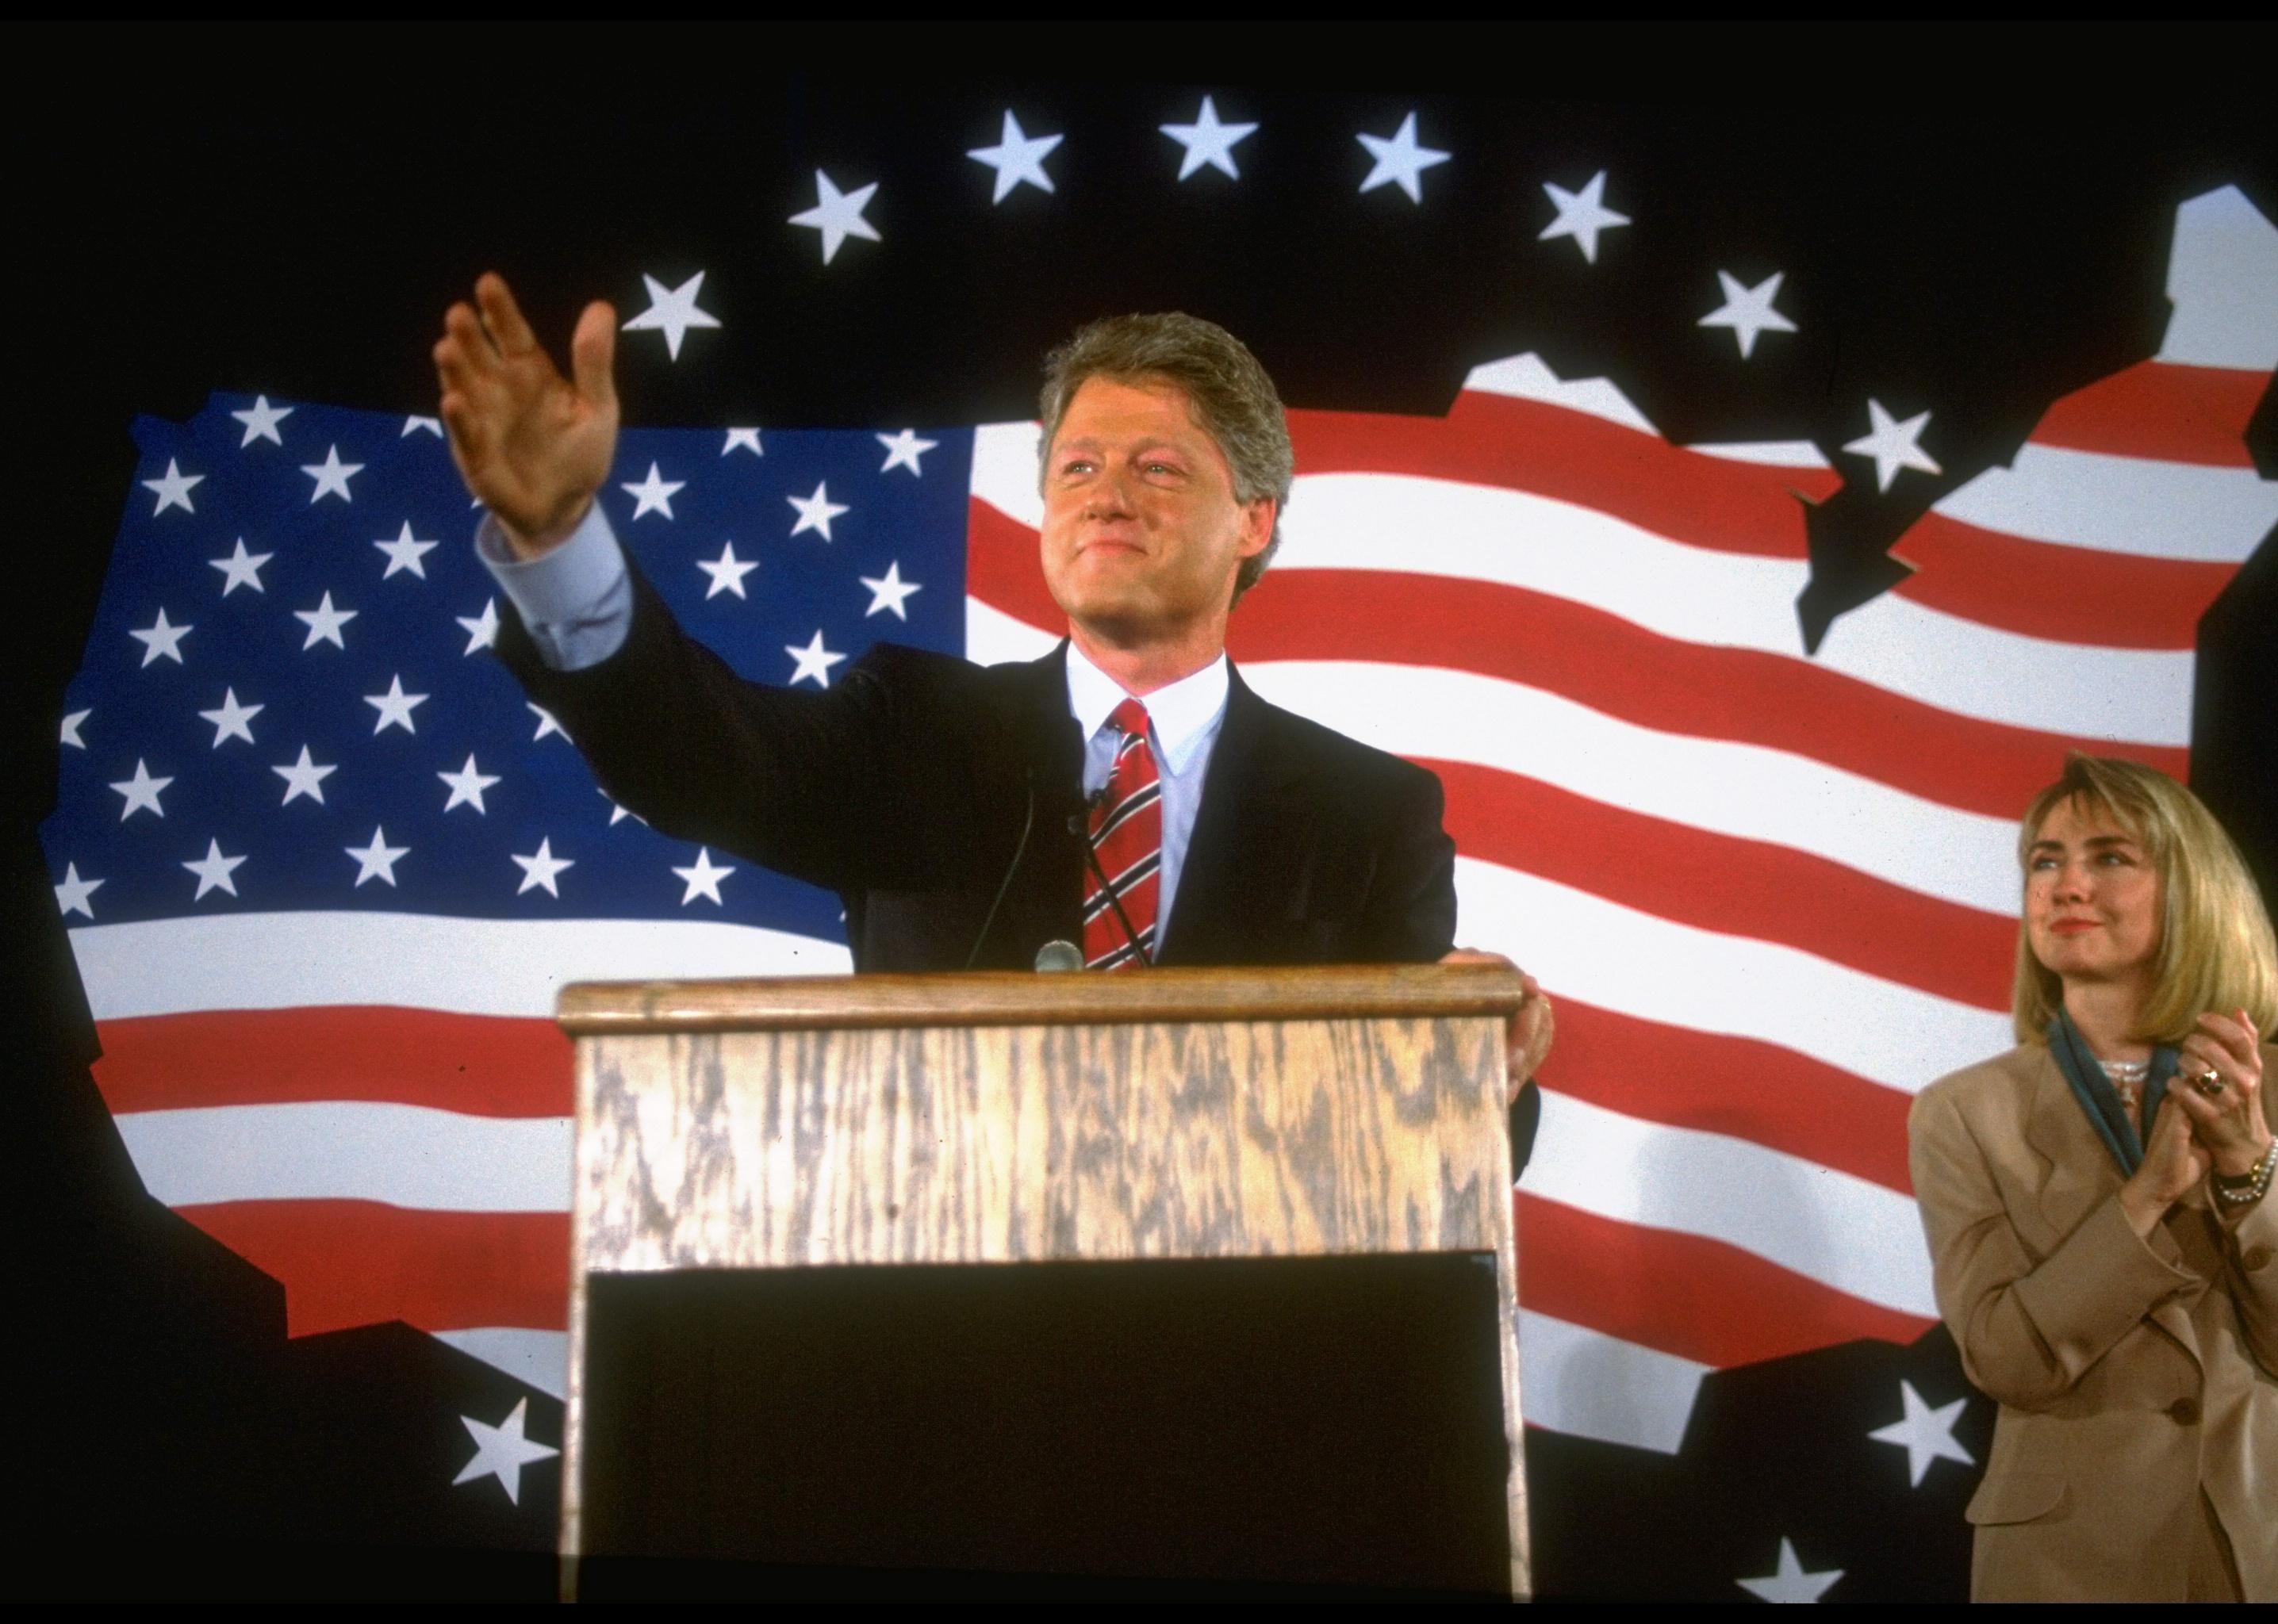 Bill Clinton campaigning for president onstage with Hillary Clinton and an American flag in the background.